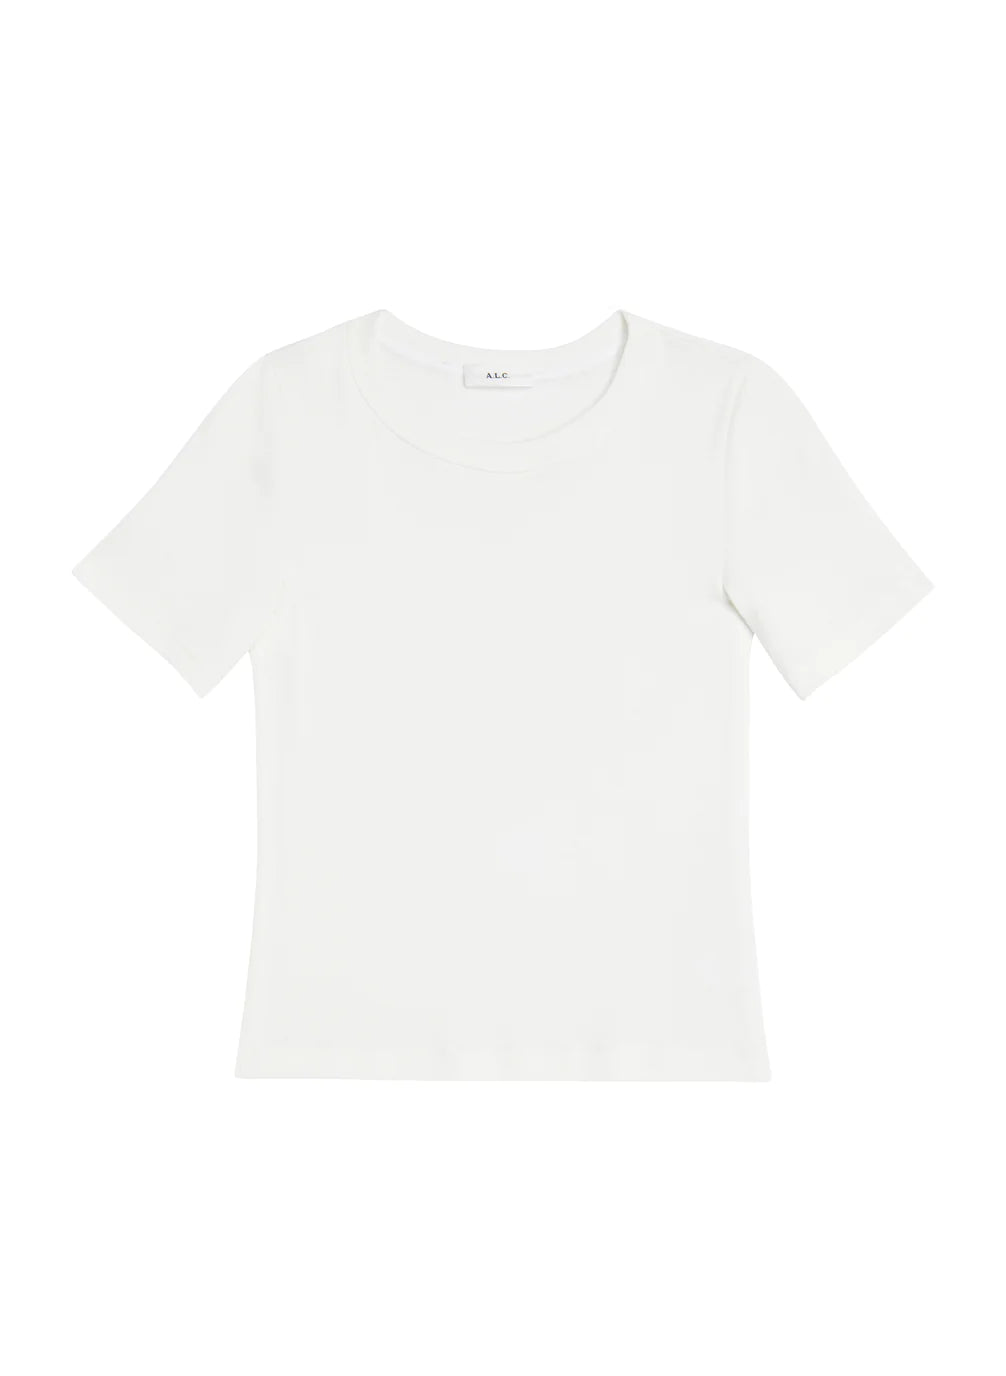 PALOMA RIB BABY TEE IN WHITE - Romi Boutique